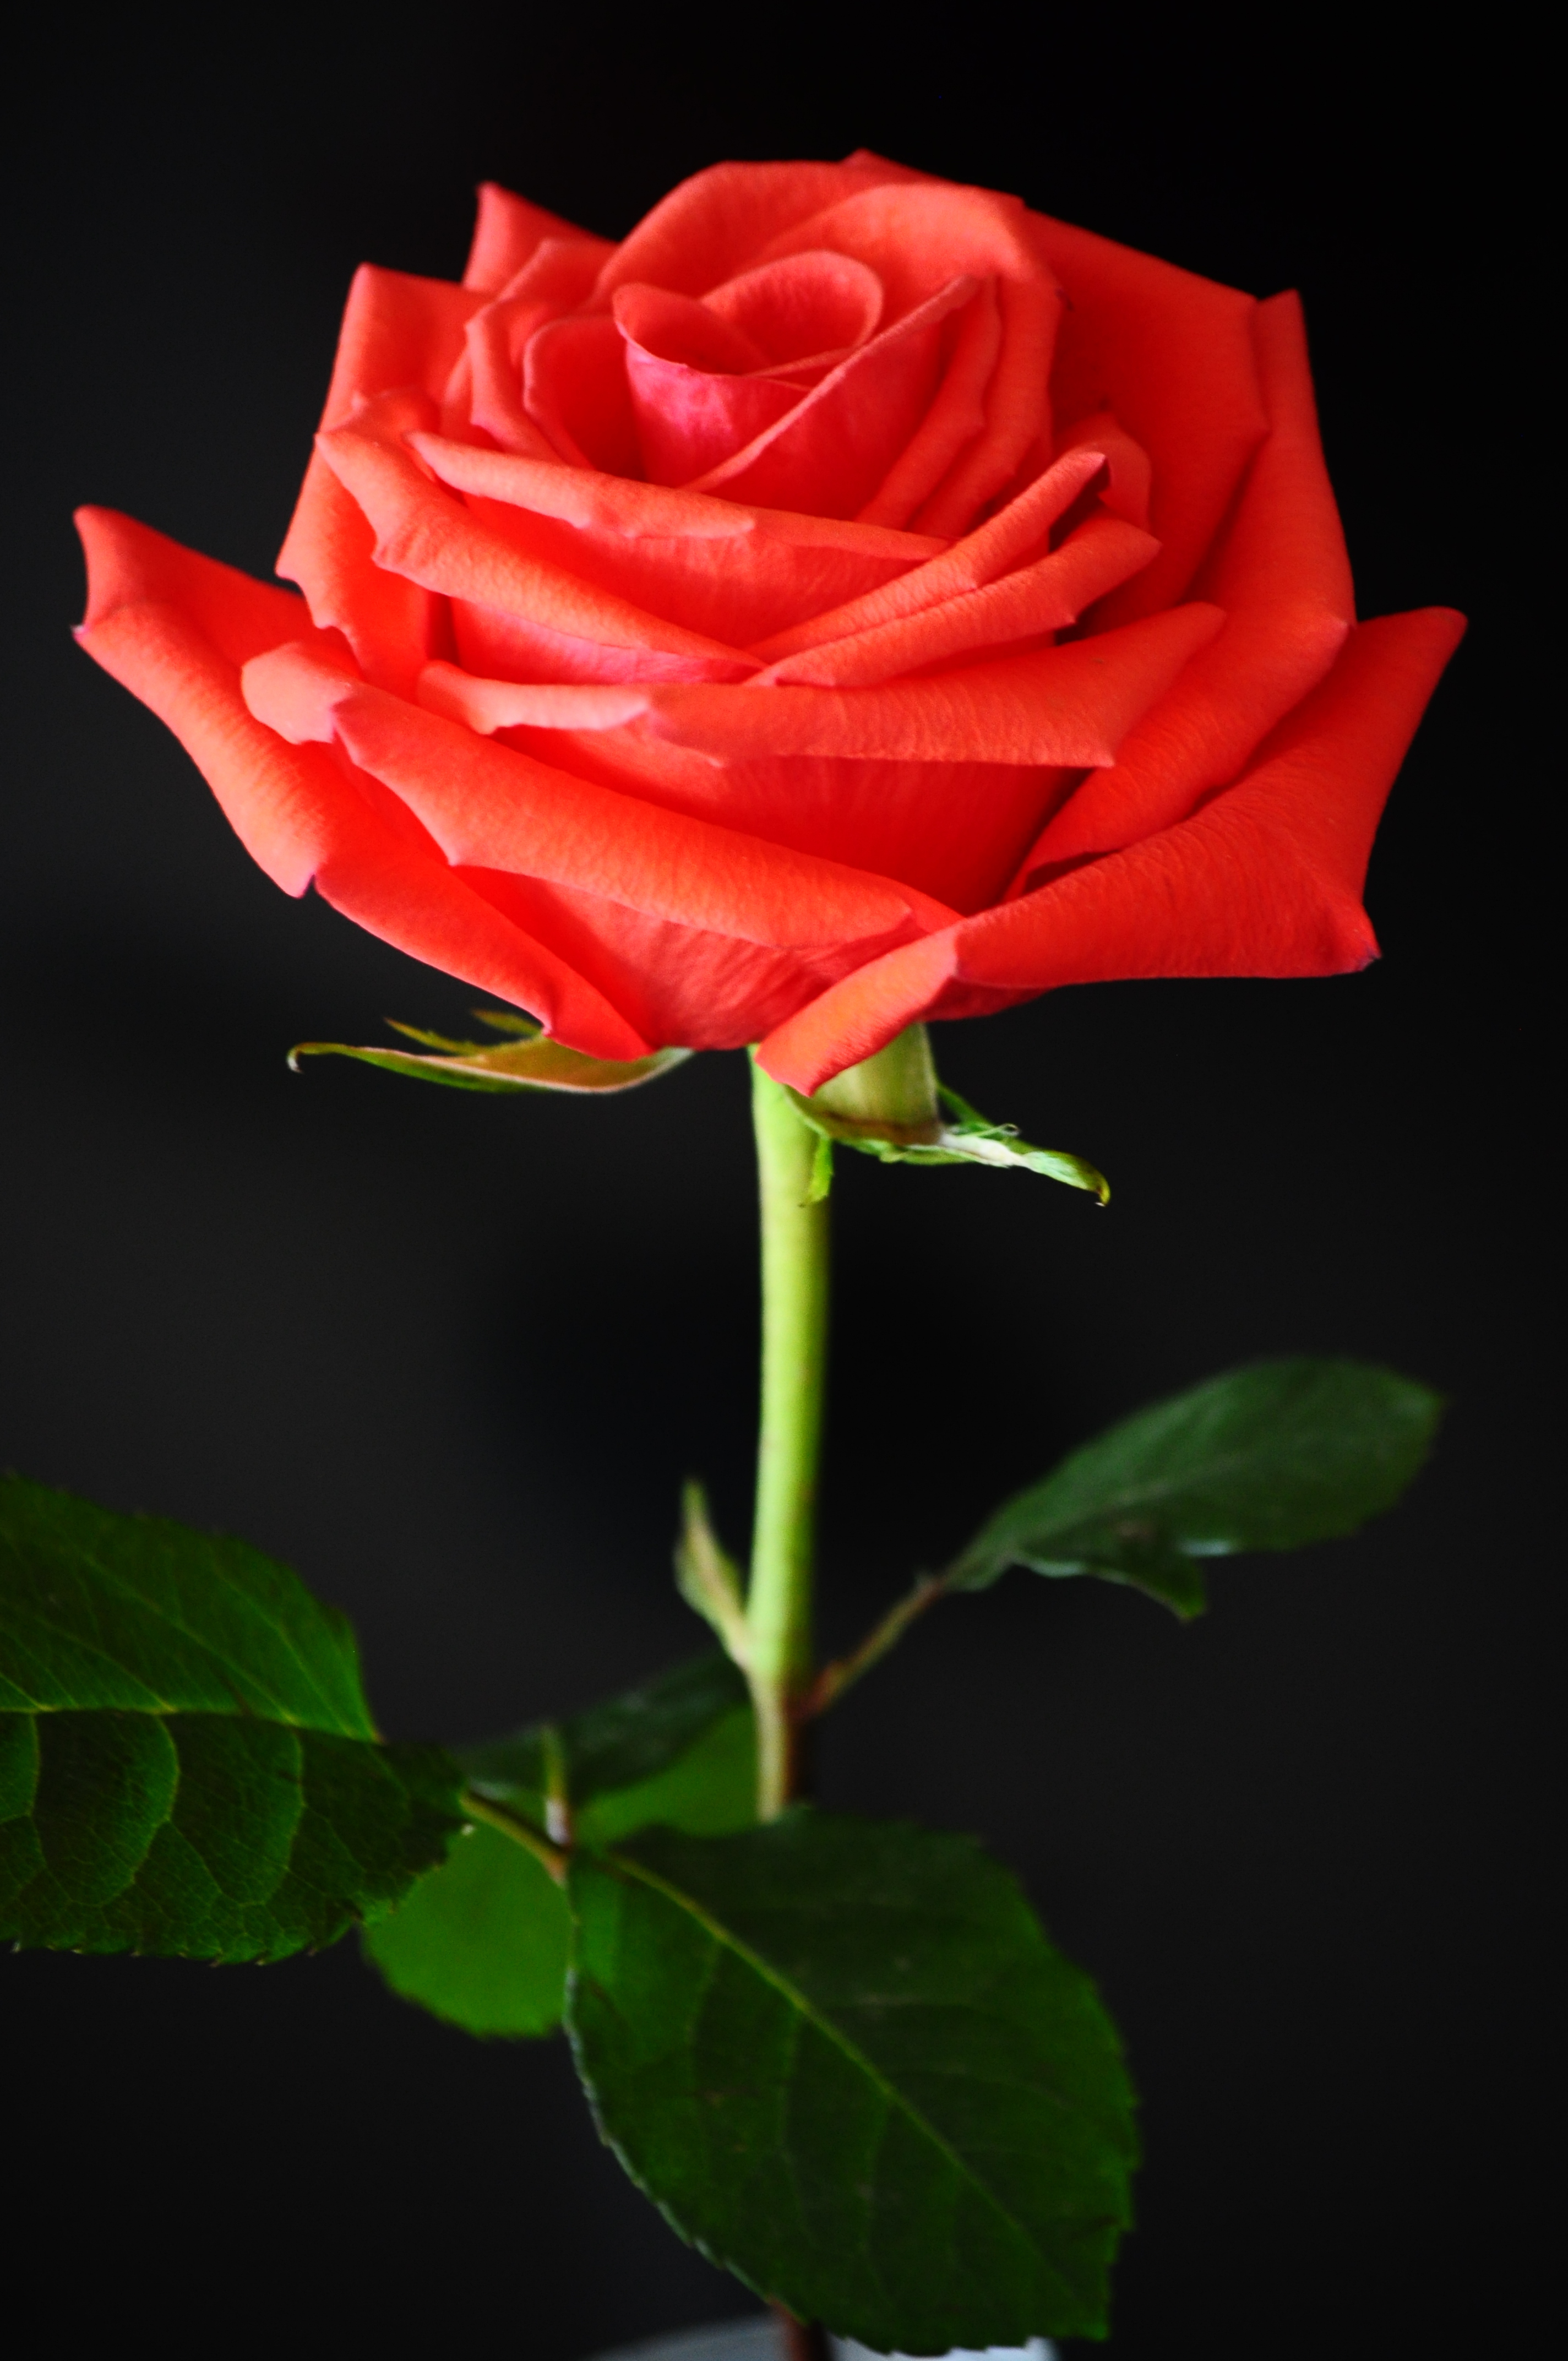 File Red Rose Against A Black Background Jpg Wikimedia Mons